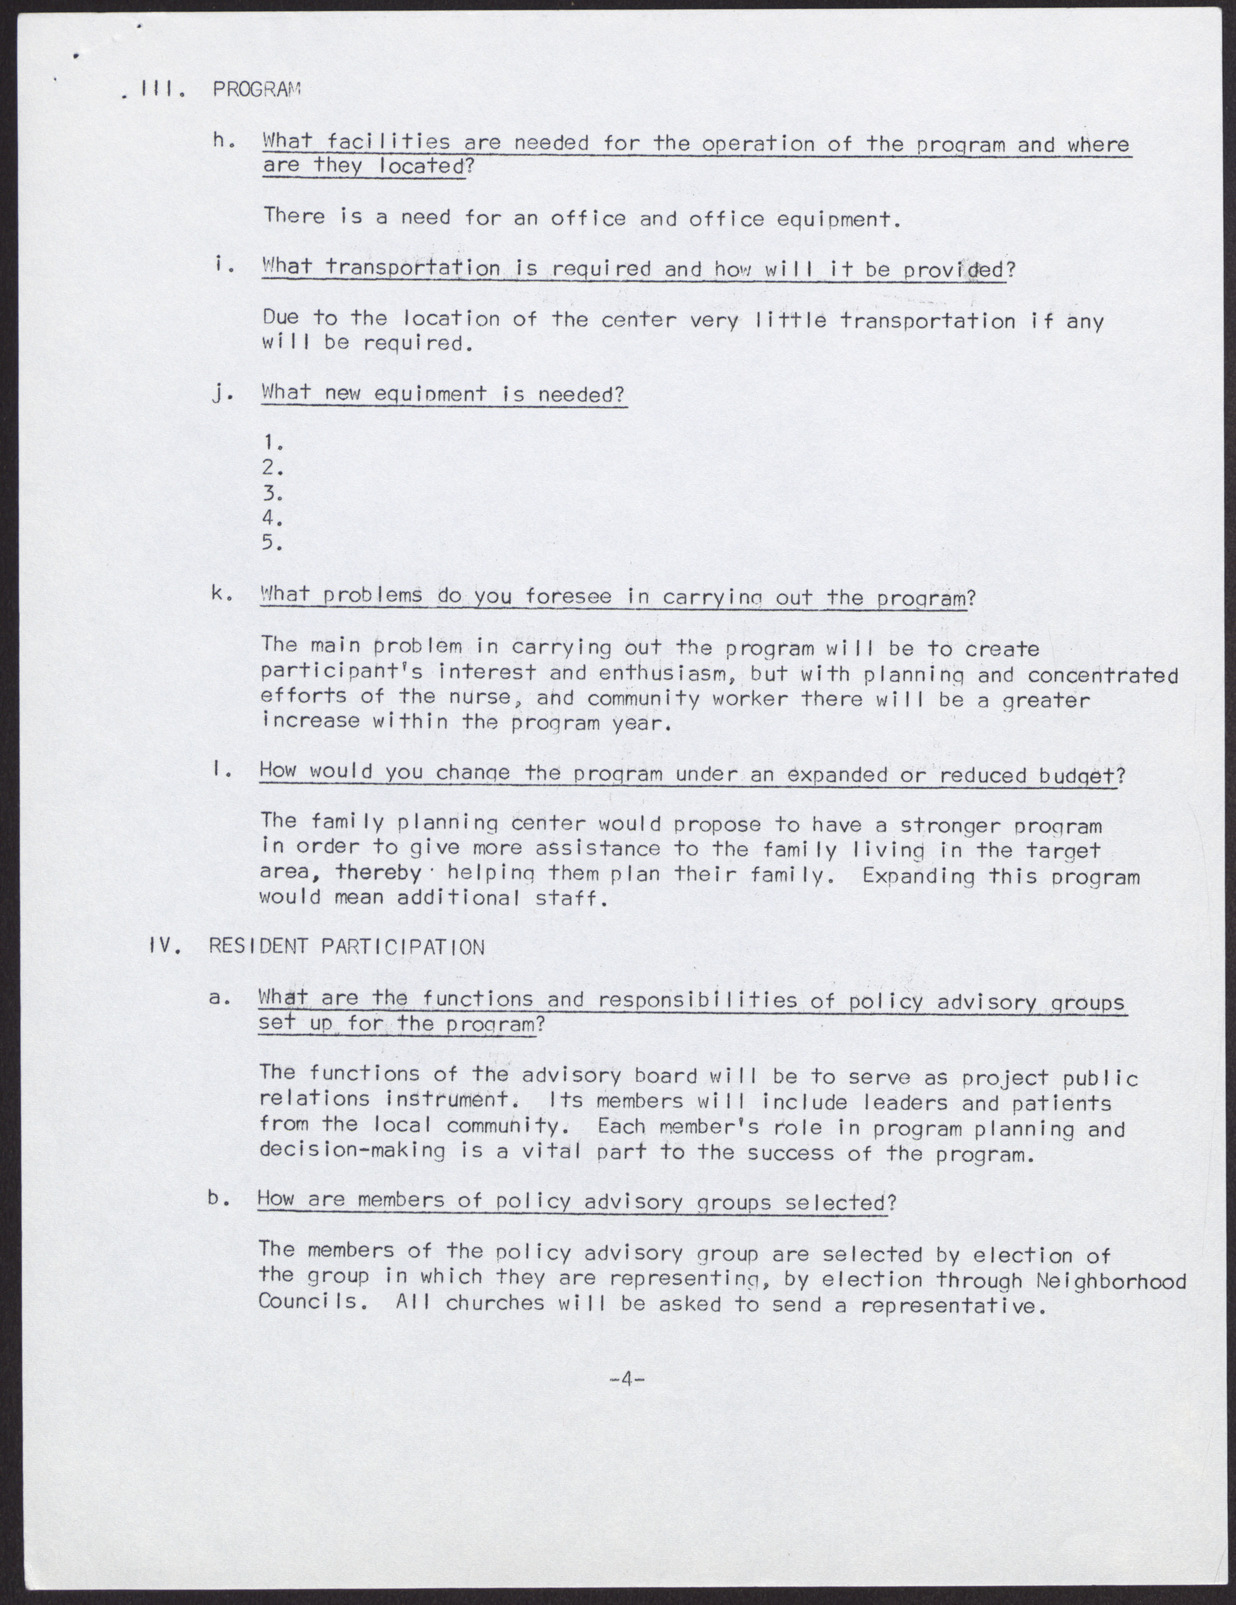 United Fund of Clark County, Inc. Manual of Operations (8 pages, possibly out of sequence or unrelated), no date, page 5